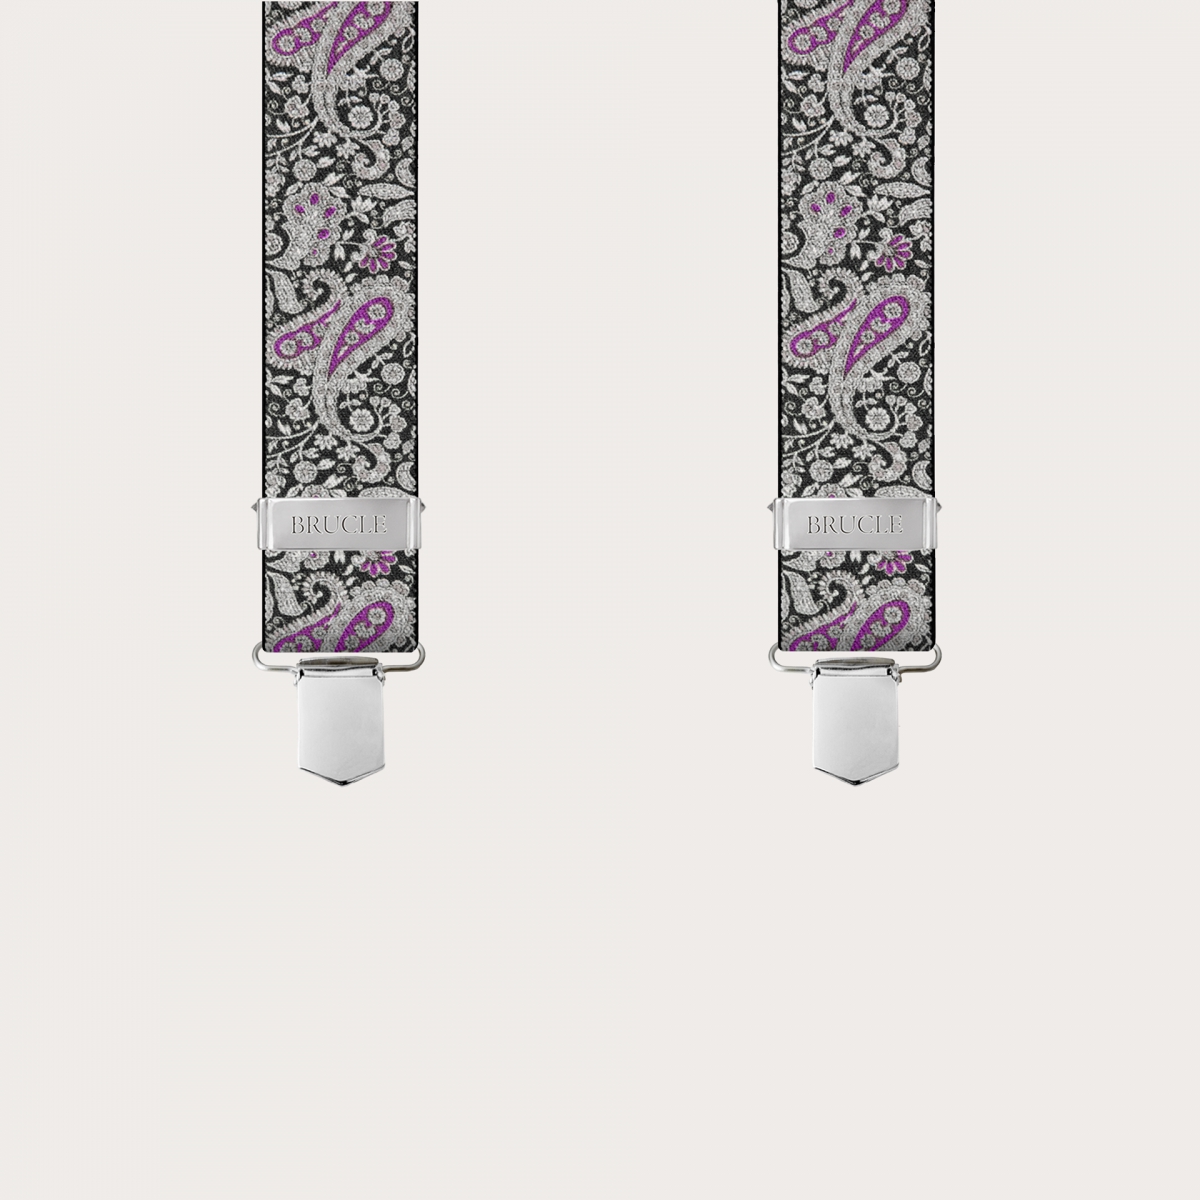 BRUCLE Suspenders with clips in black and purple cashmere pattern